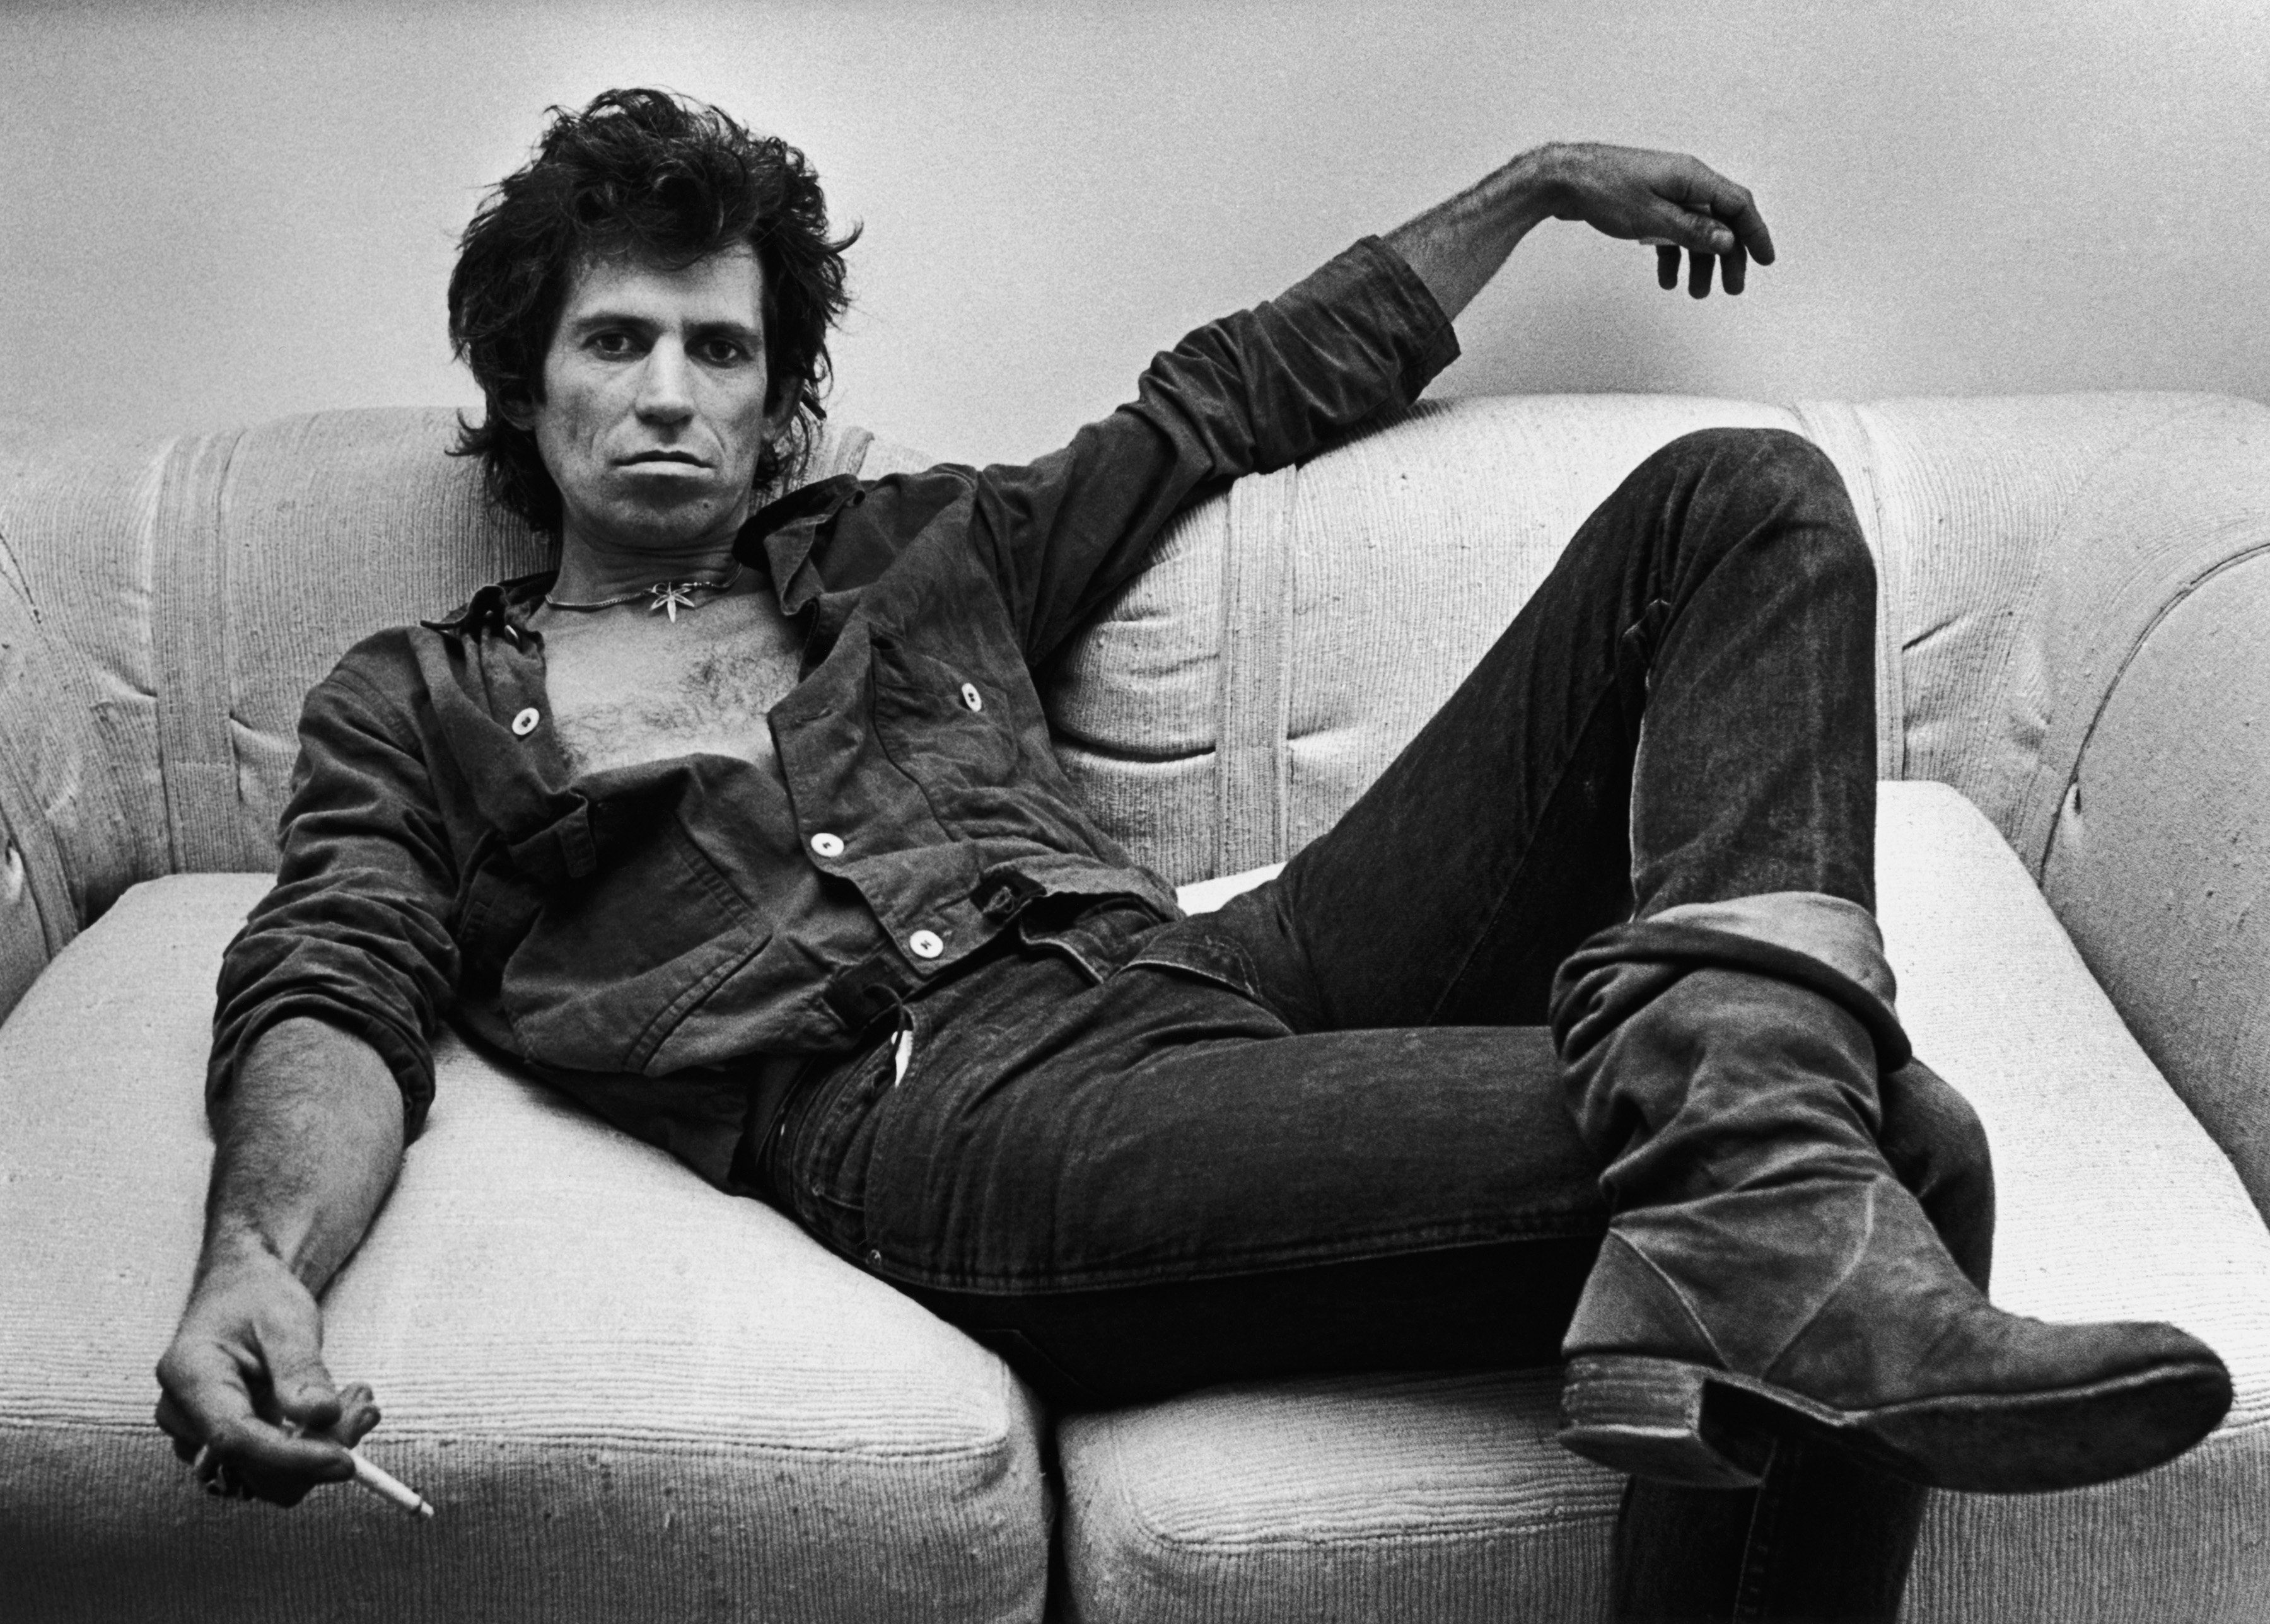 Keith Richards on a couch during The Rolling Stones' "Angie" era